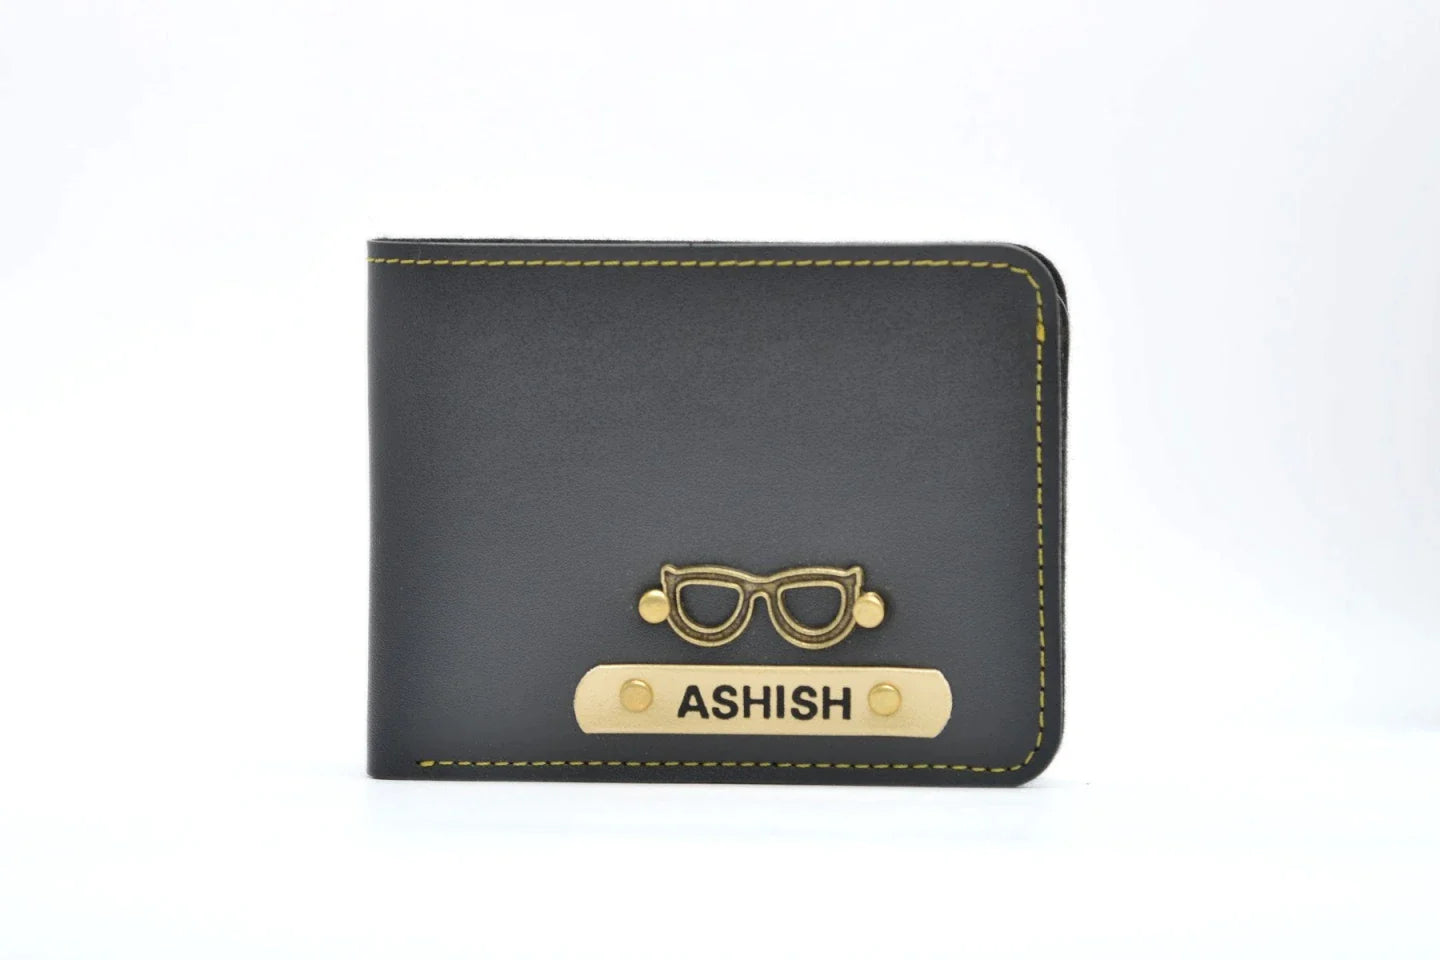 This classy, stylish, trending and affordable wallet is the perfect fit for travel, tours and trips. The sturdy and strong classy leather is very enduring and long-lasting.